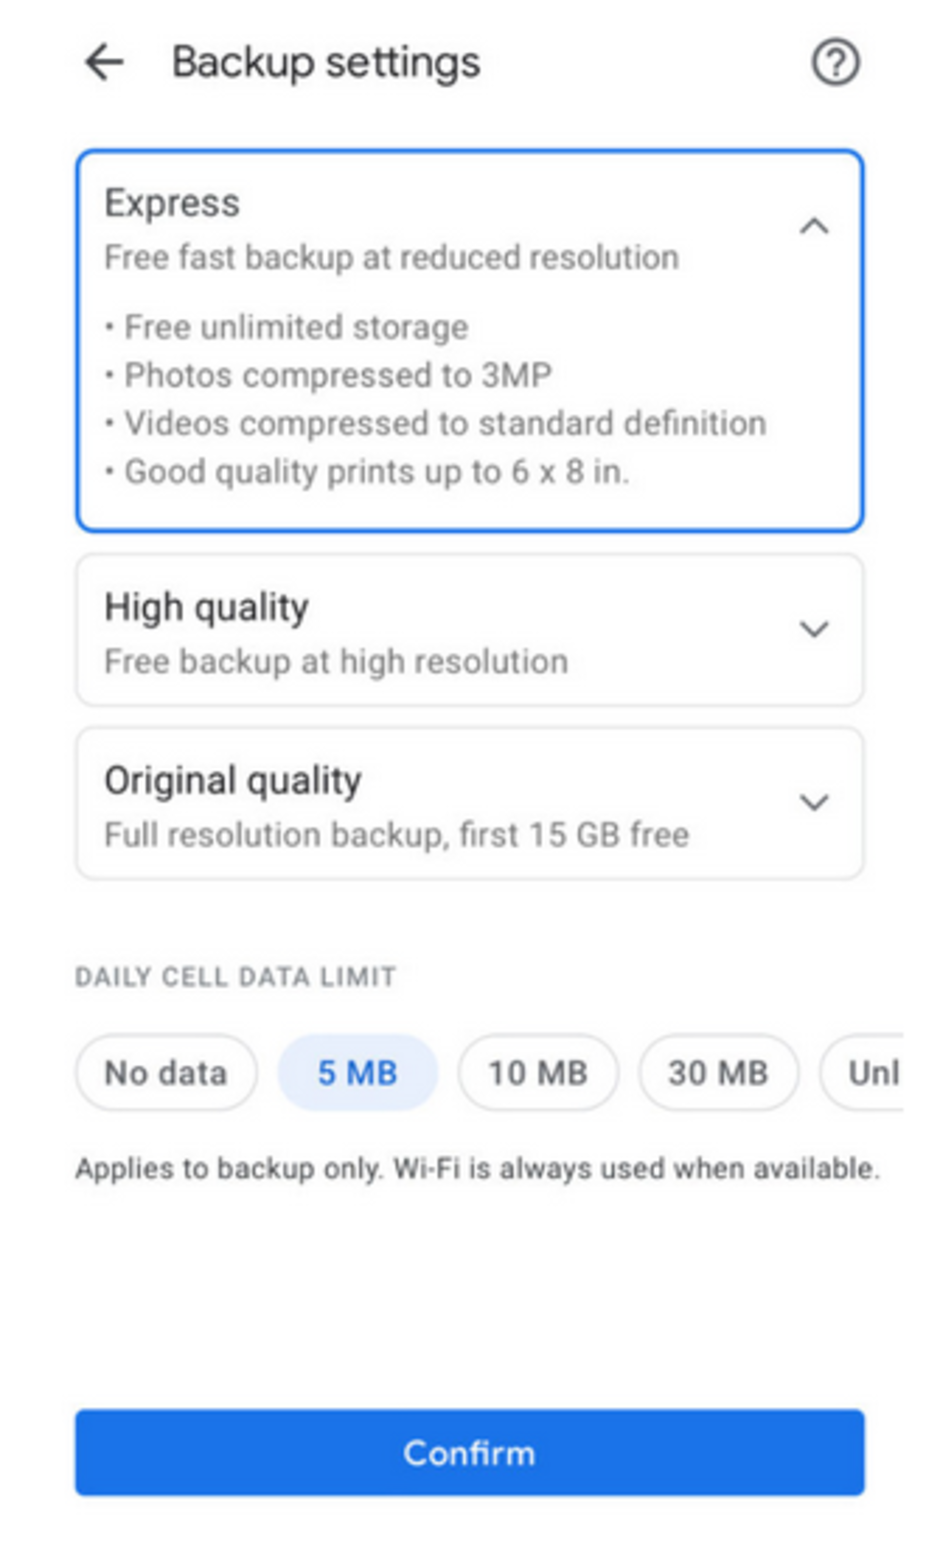 Express is coming to Google Photos to save your data - Google Photos new Express backup mode will help users save their data